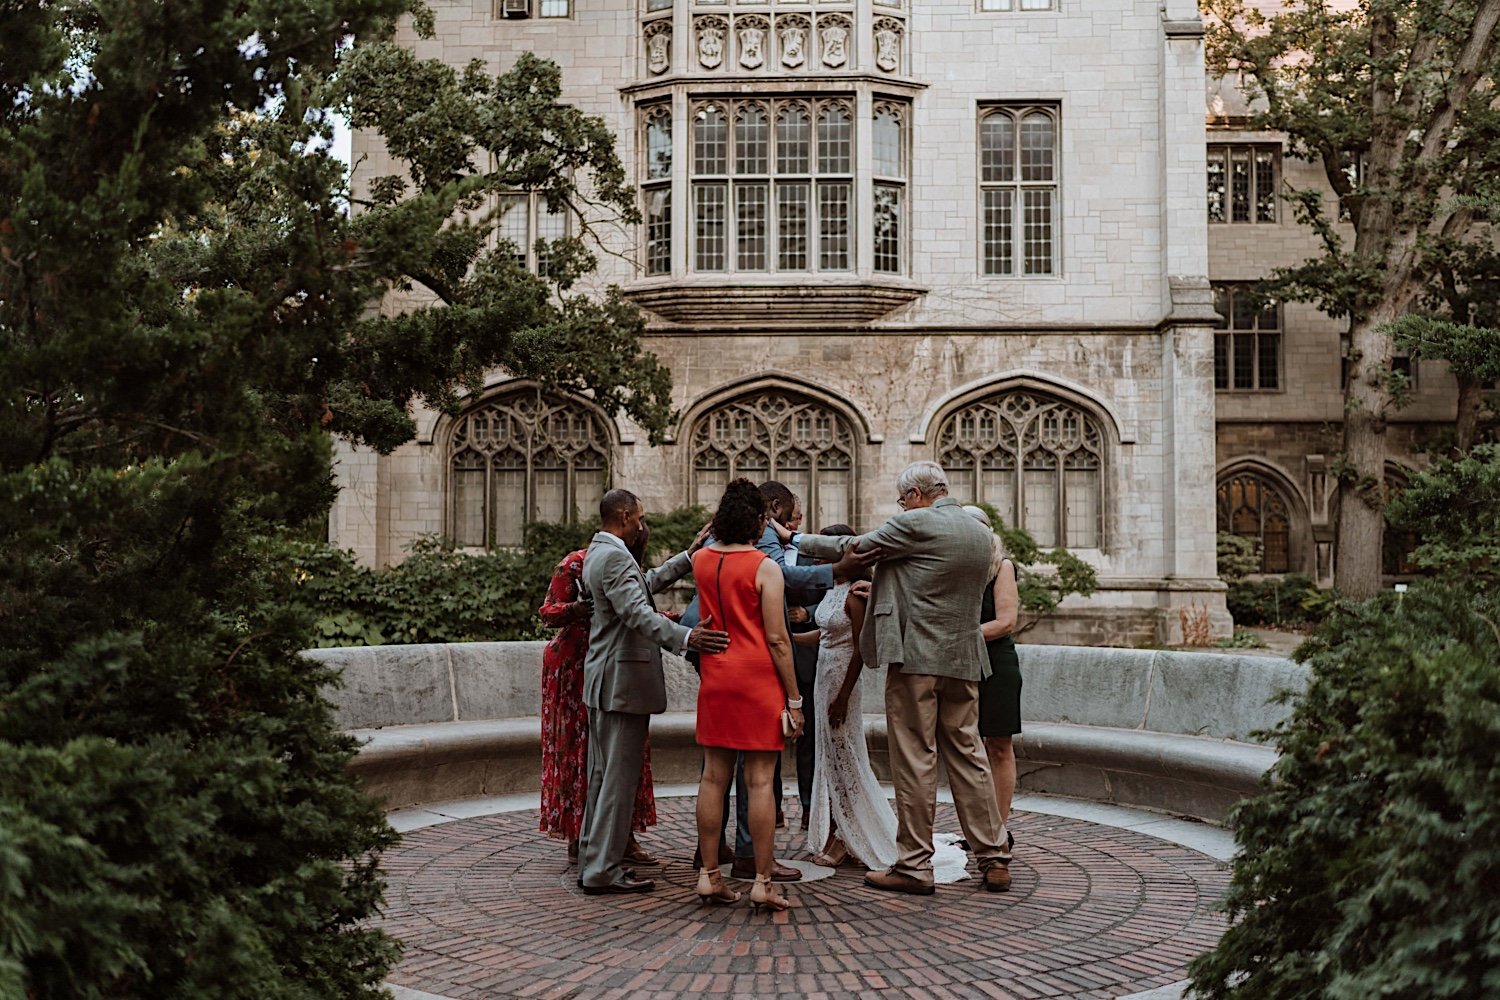 Bride, groom and family share prayer after University of Chicago elopement ceremony